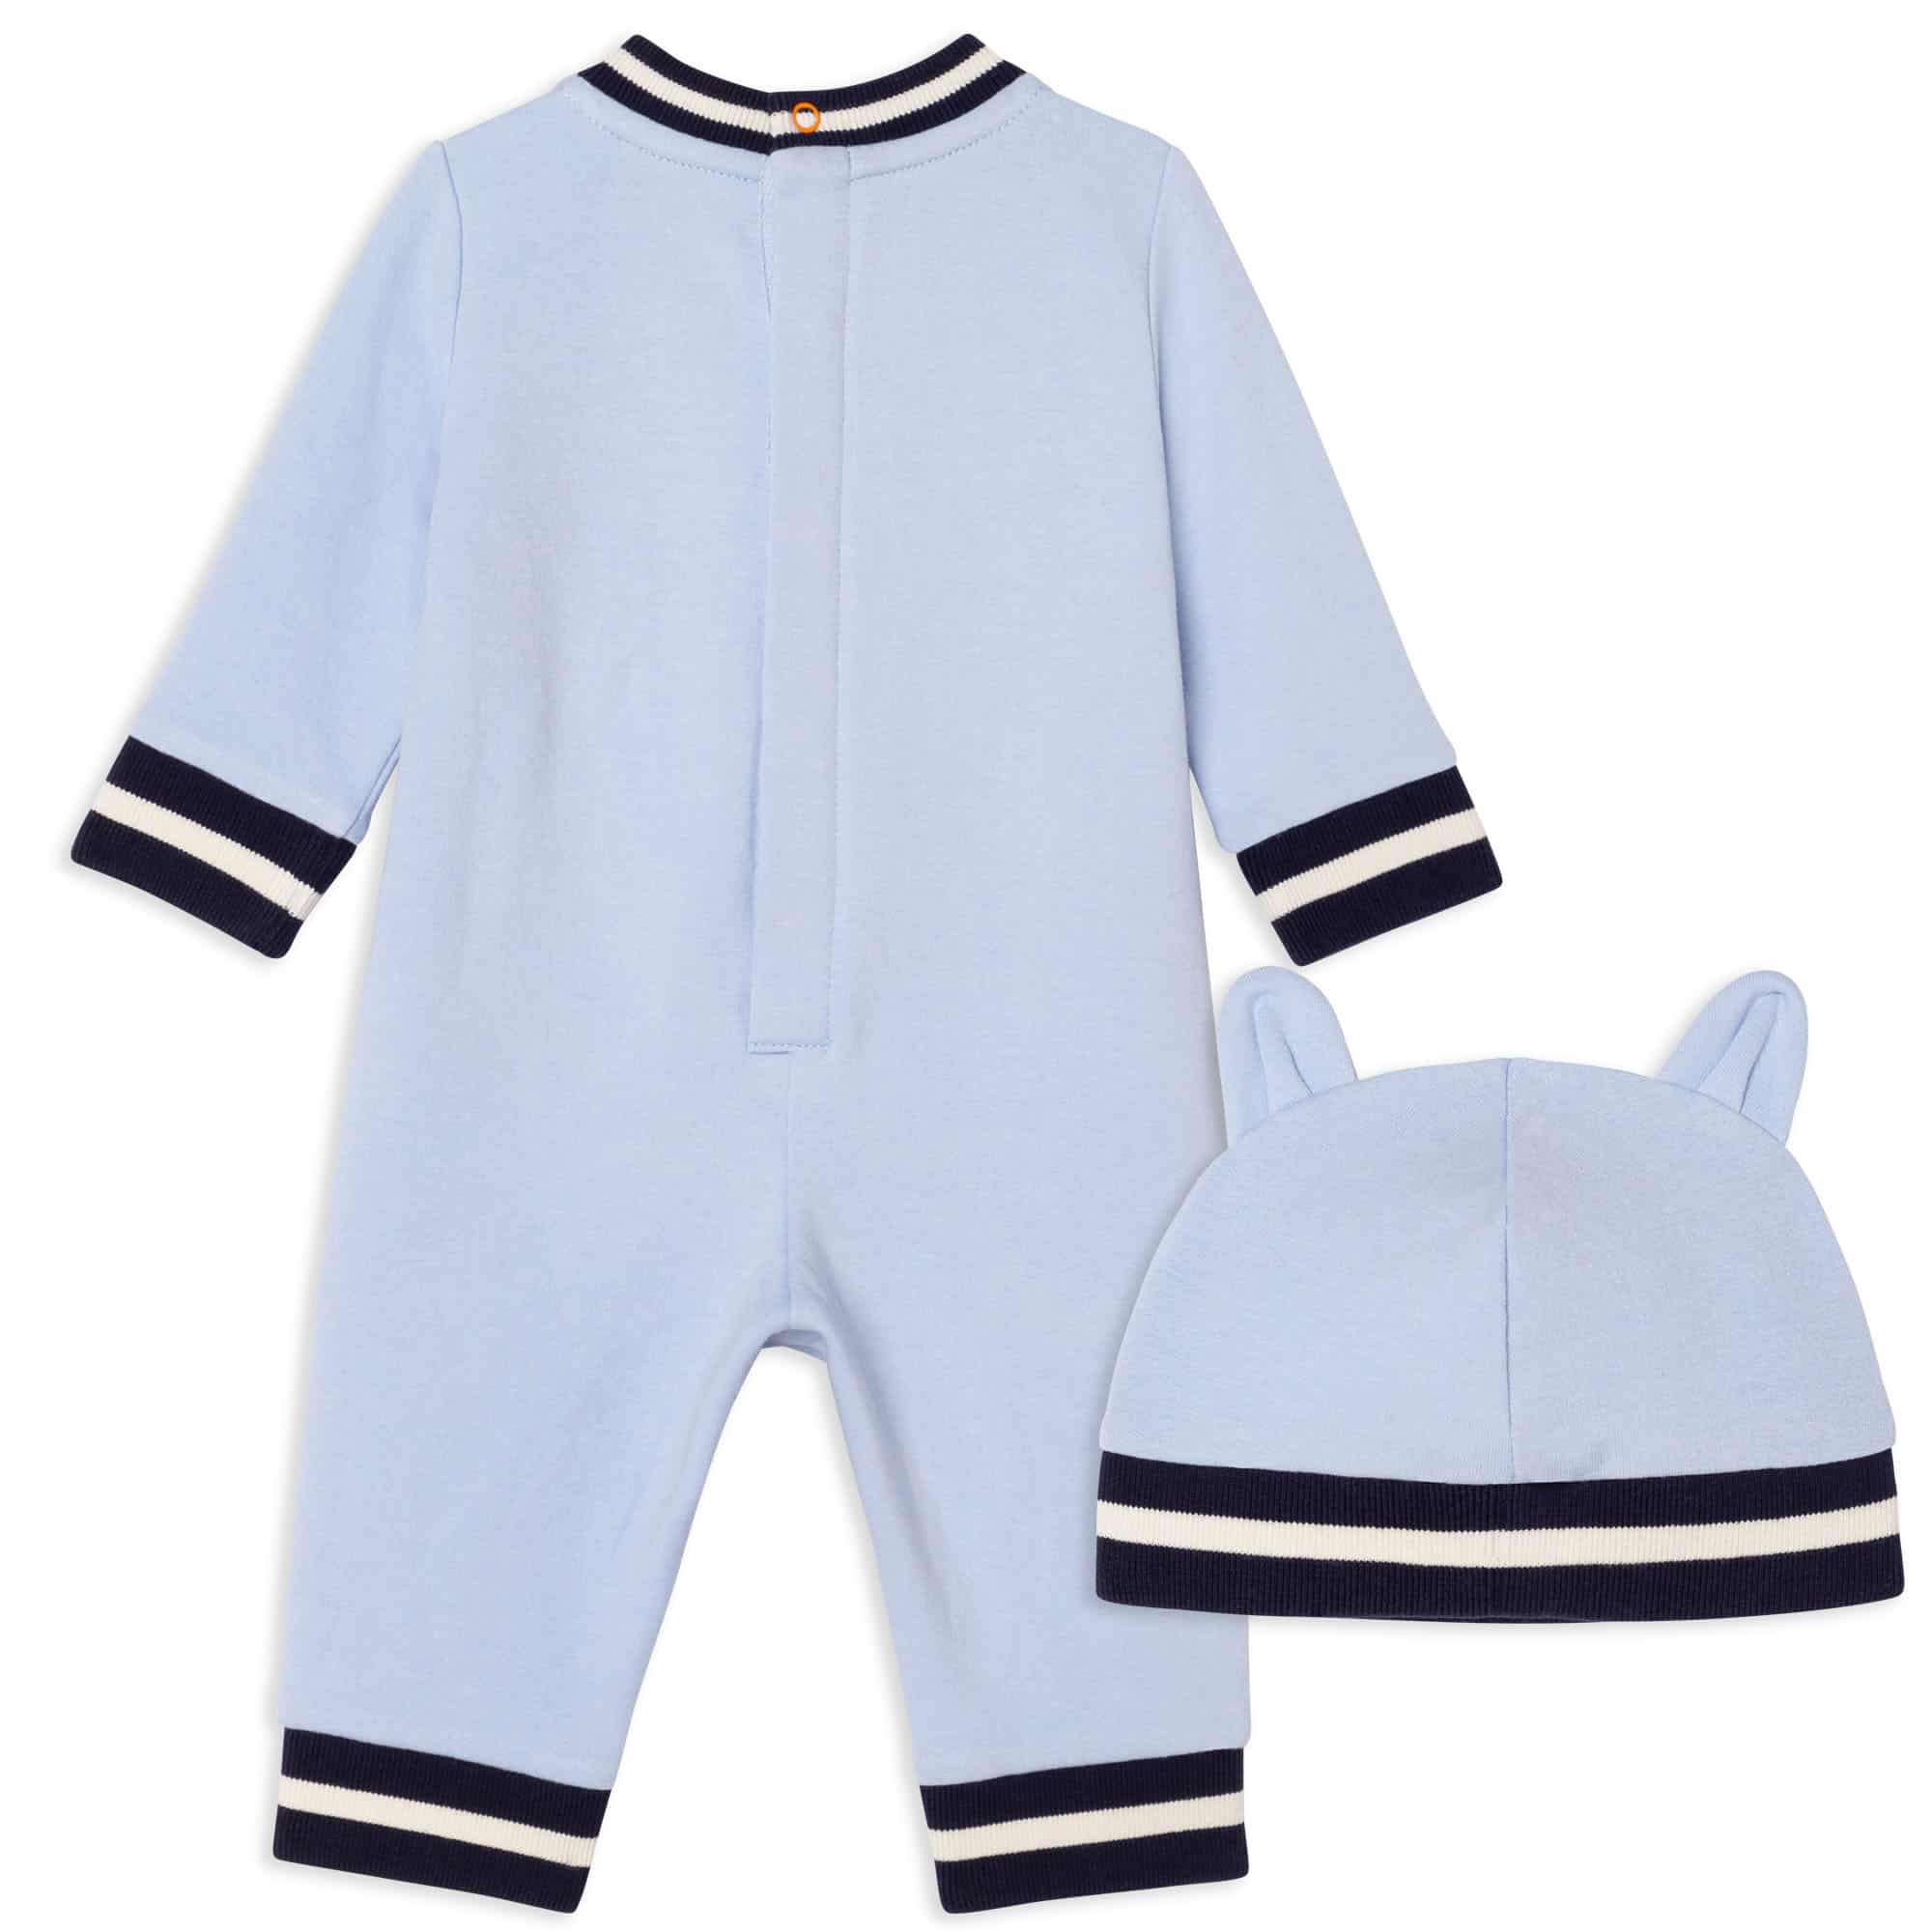 Timberland baby blue all in one set back view with hat